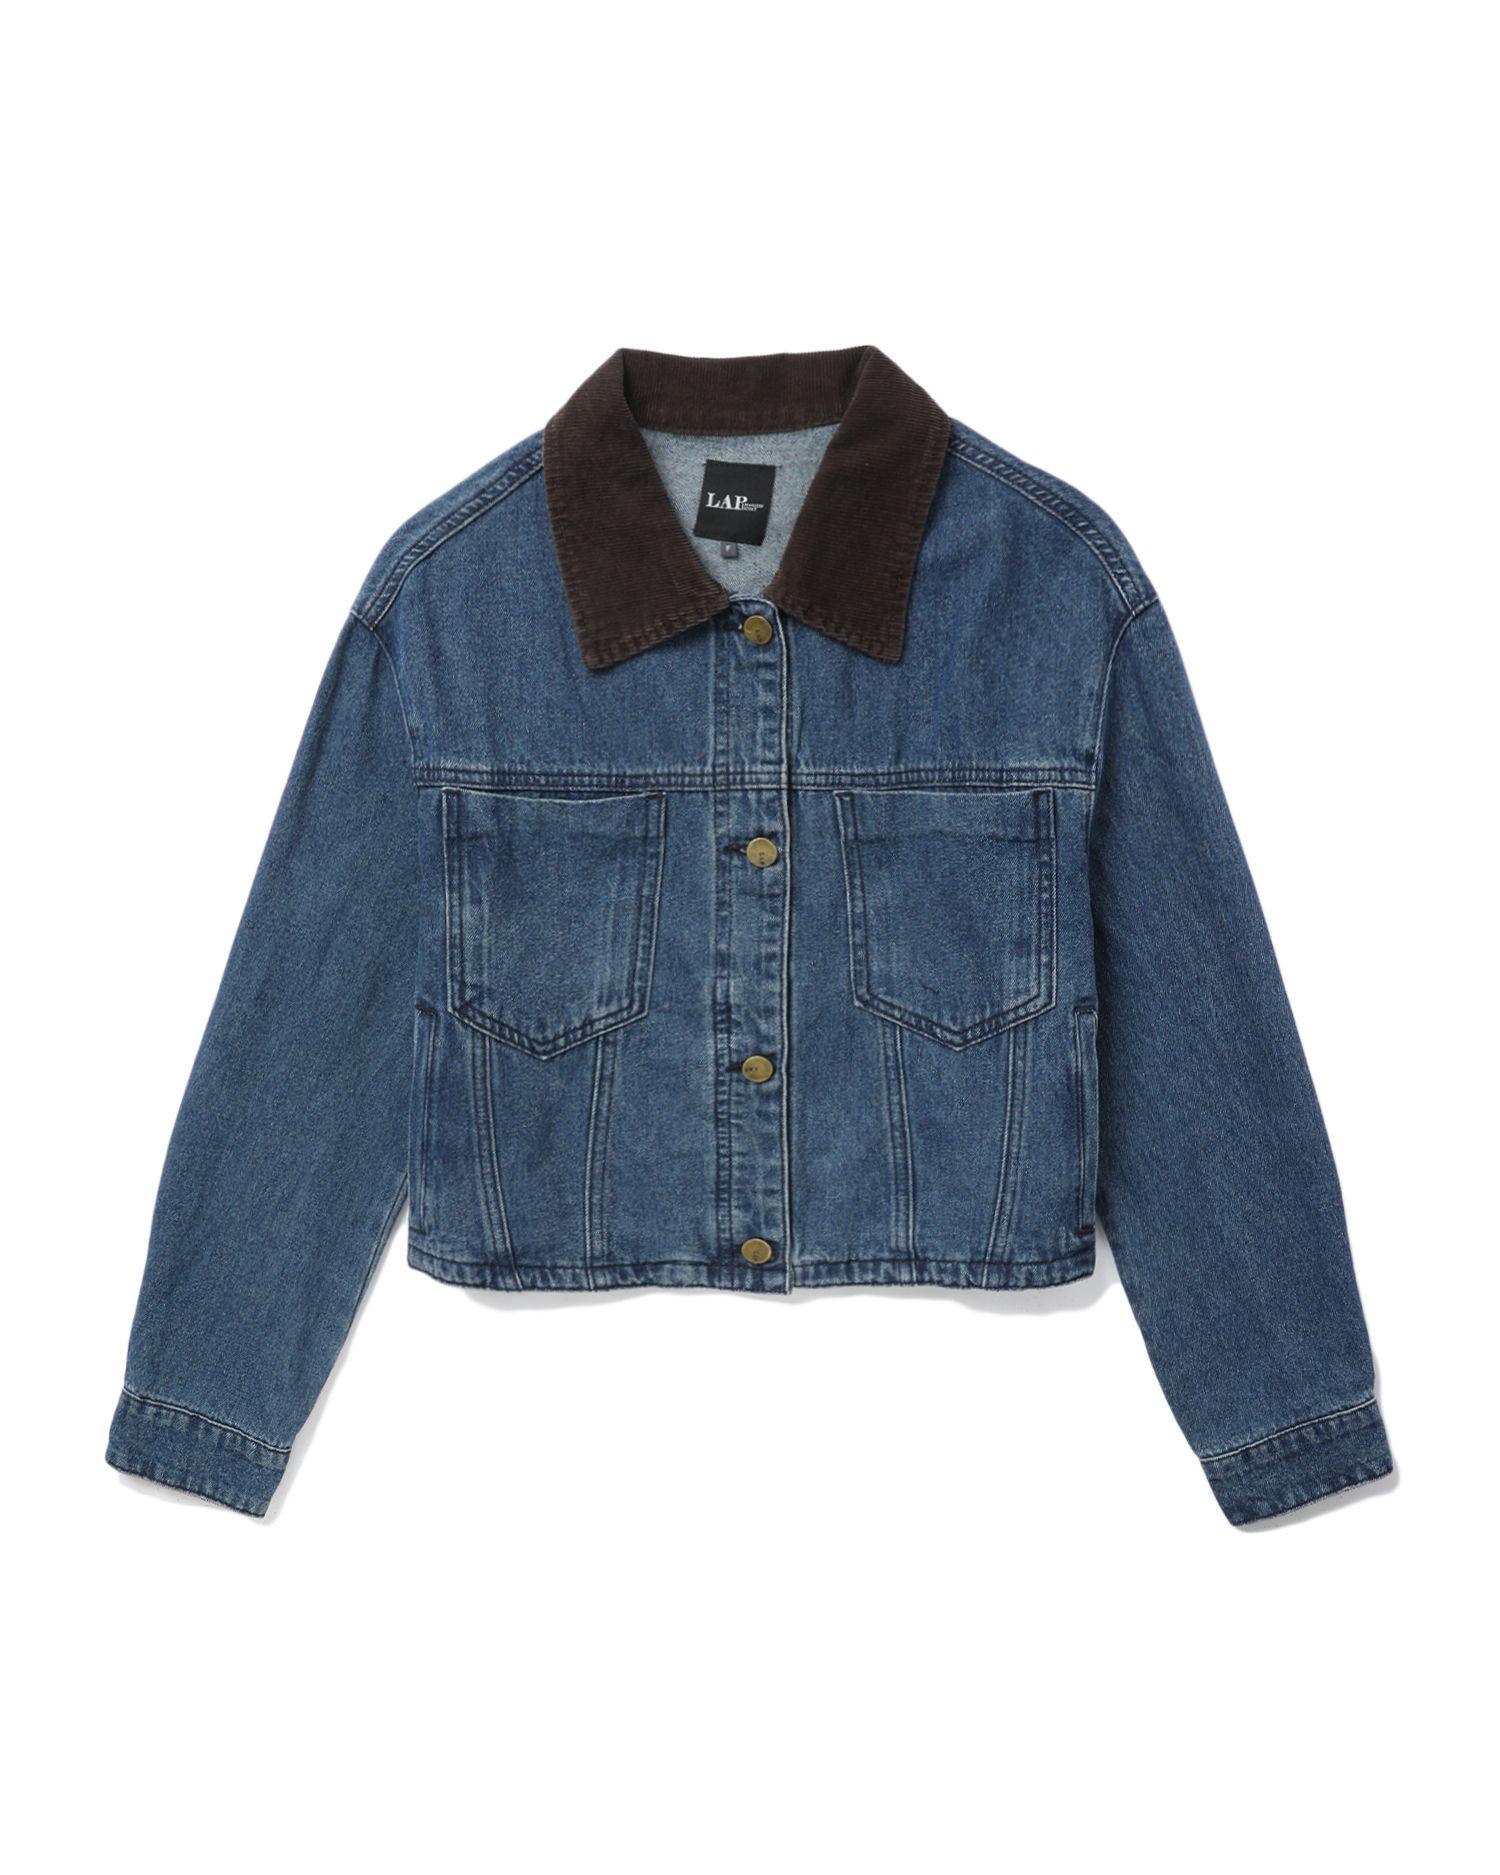 Panelled cropped denim jacket by LOS ANGELES PROJECT